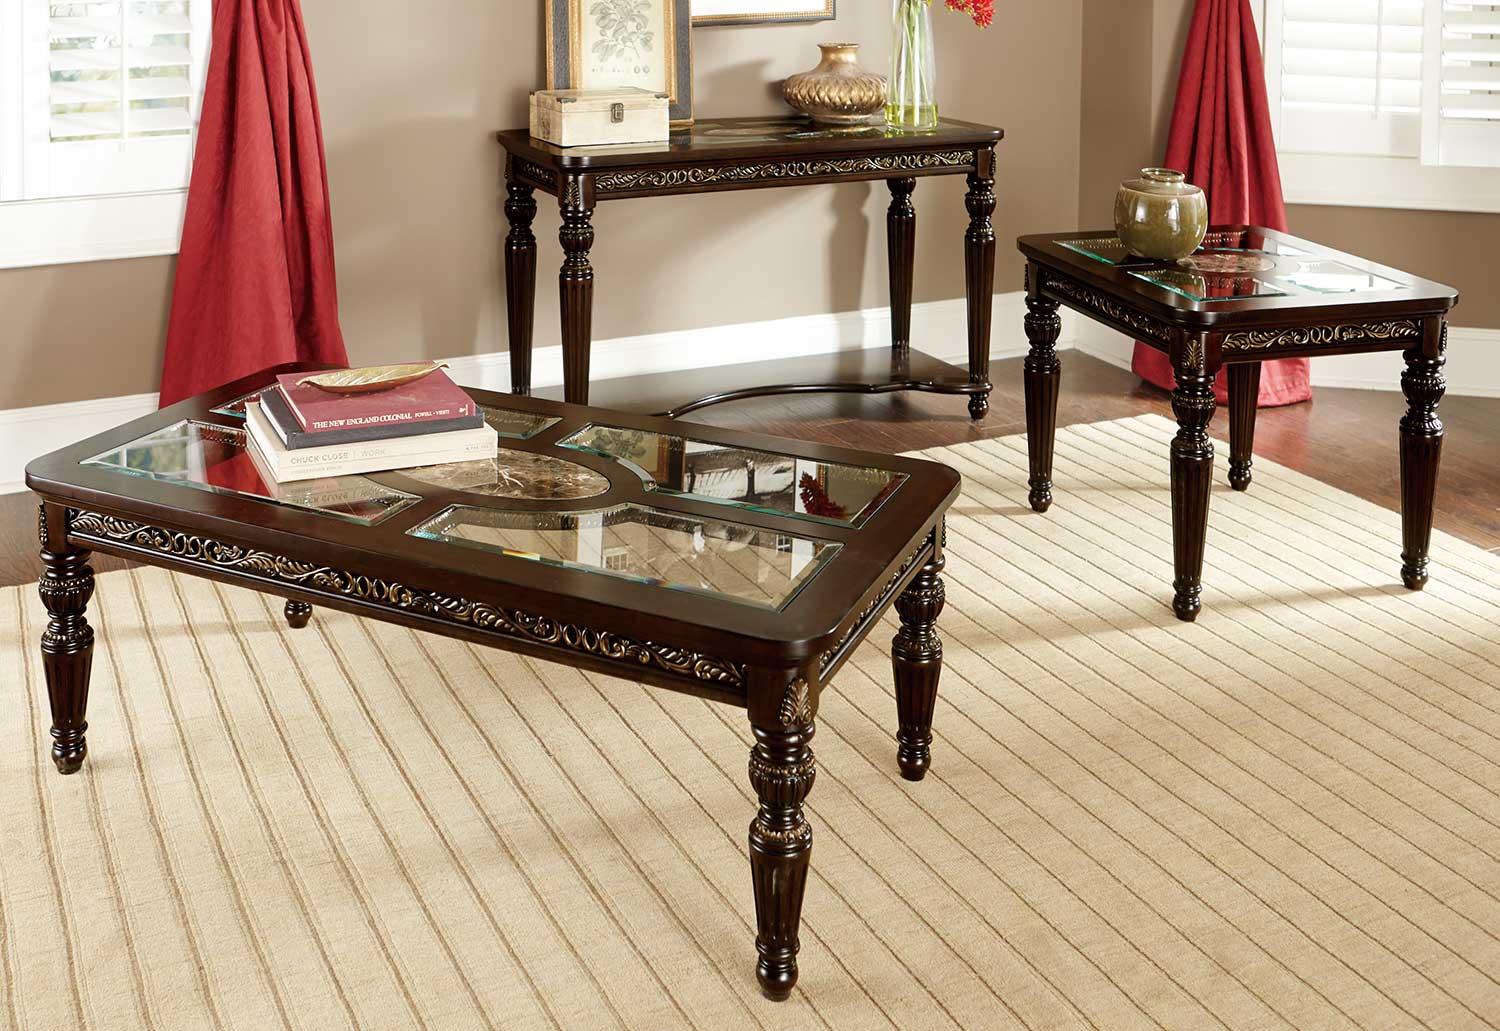 Homelegance Russian Hill Coffee Table Set - Cherry with Glass Insert and Faux Marble Inlay